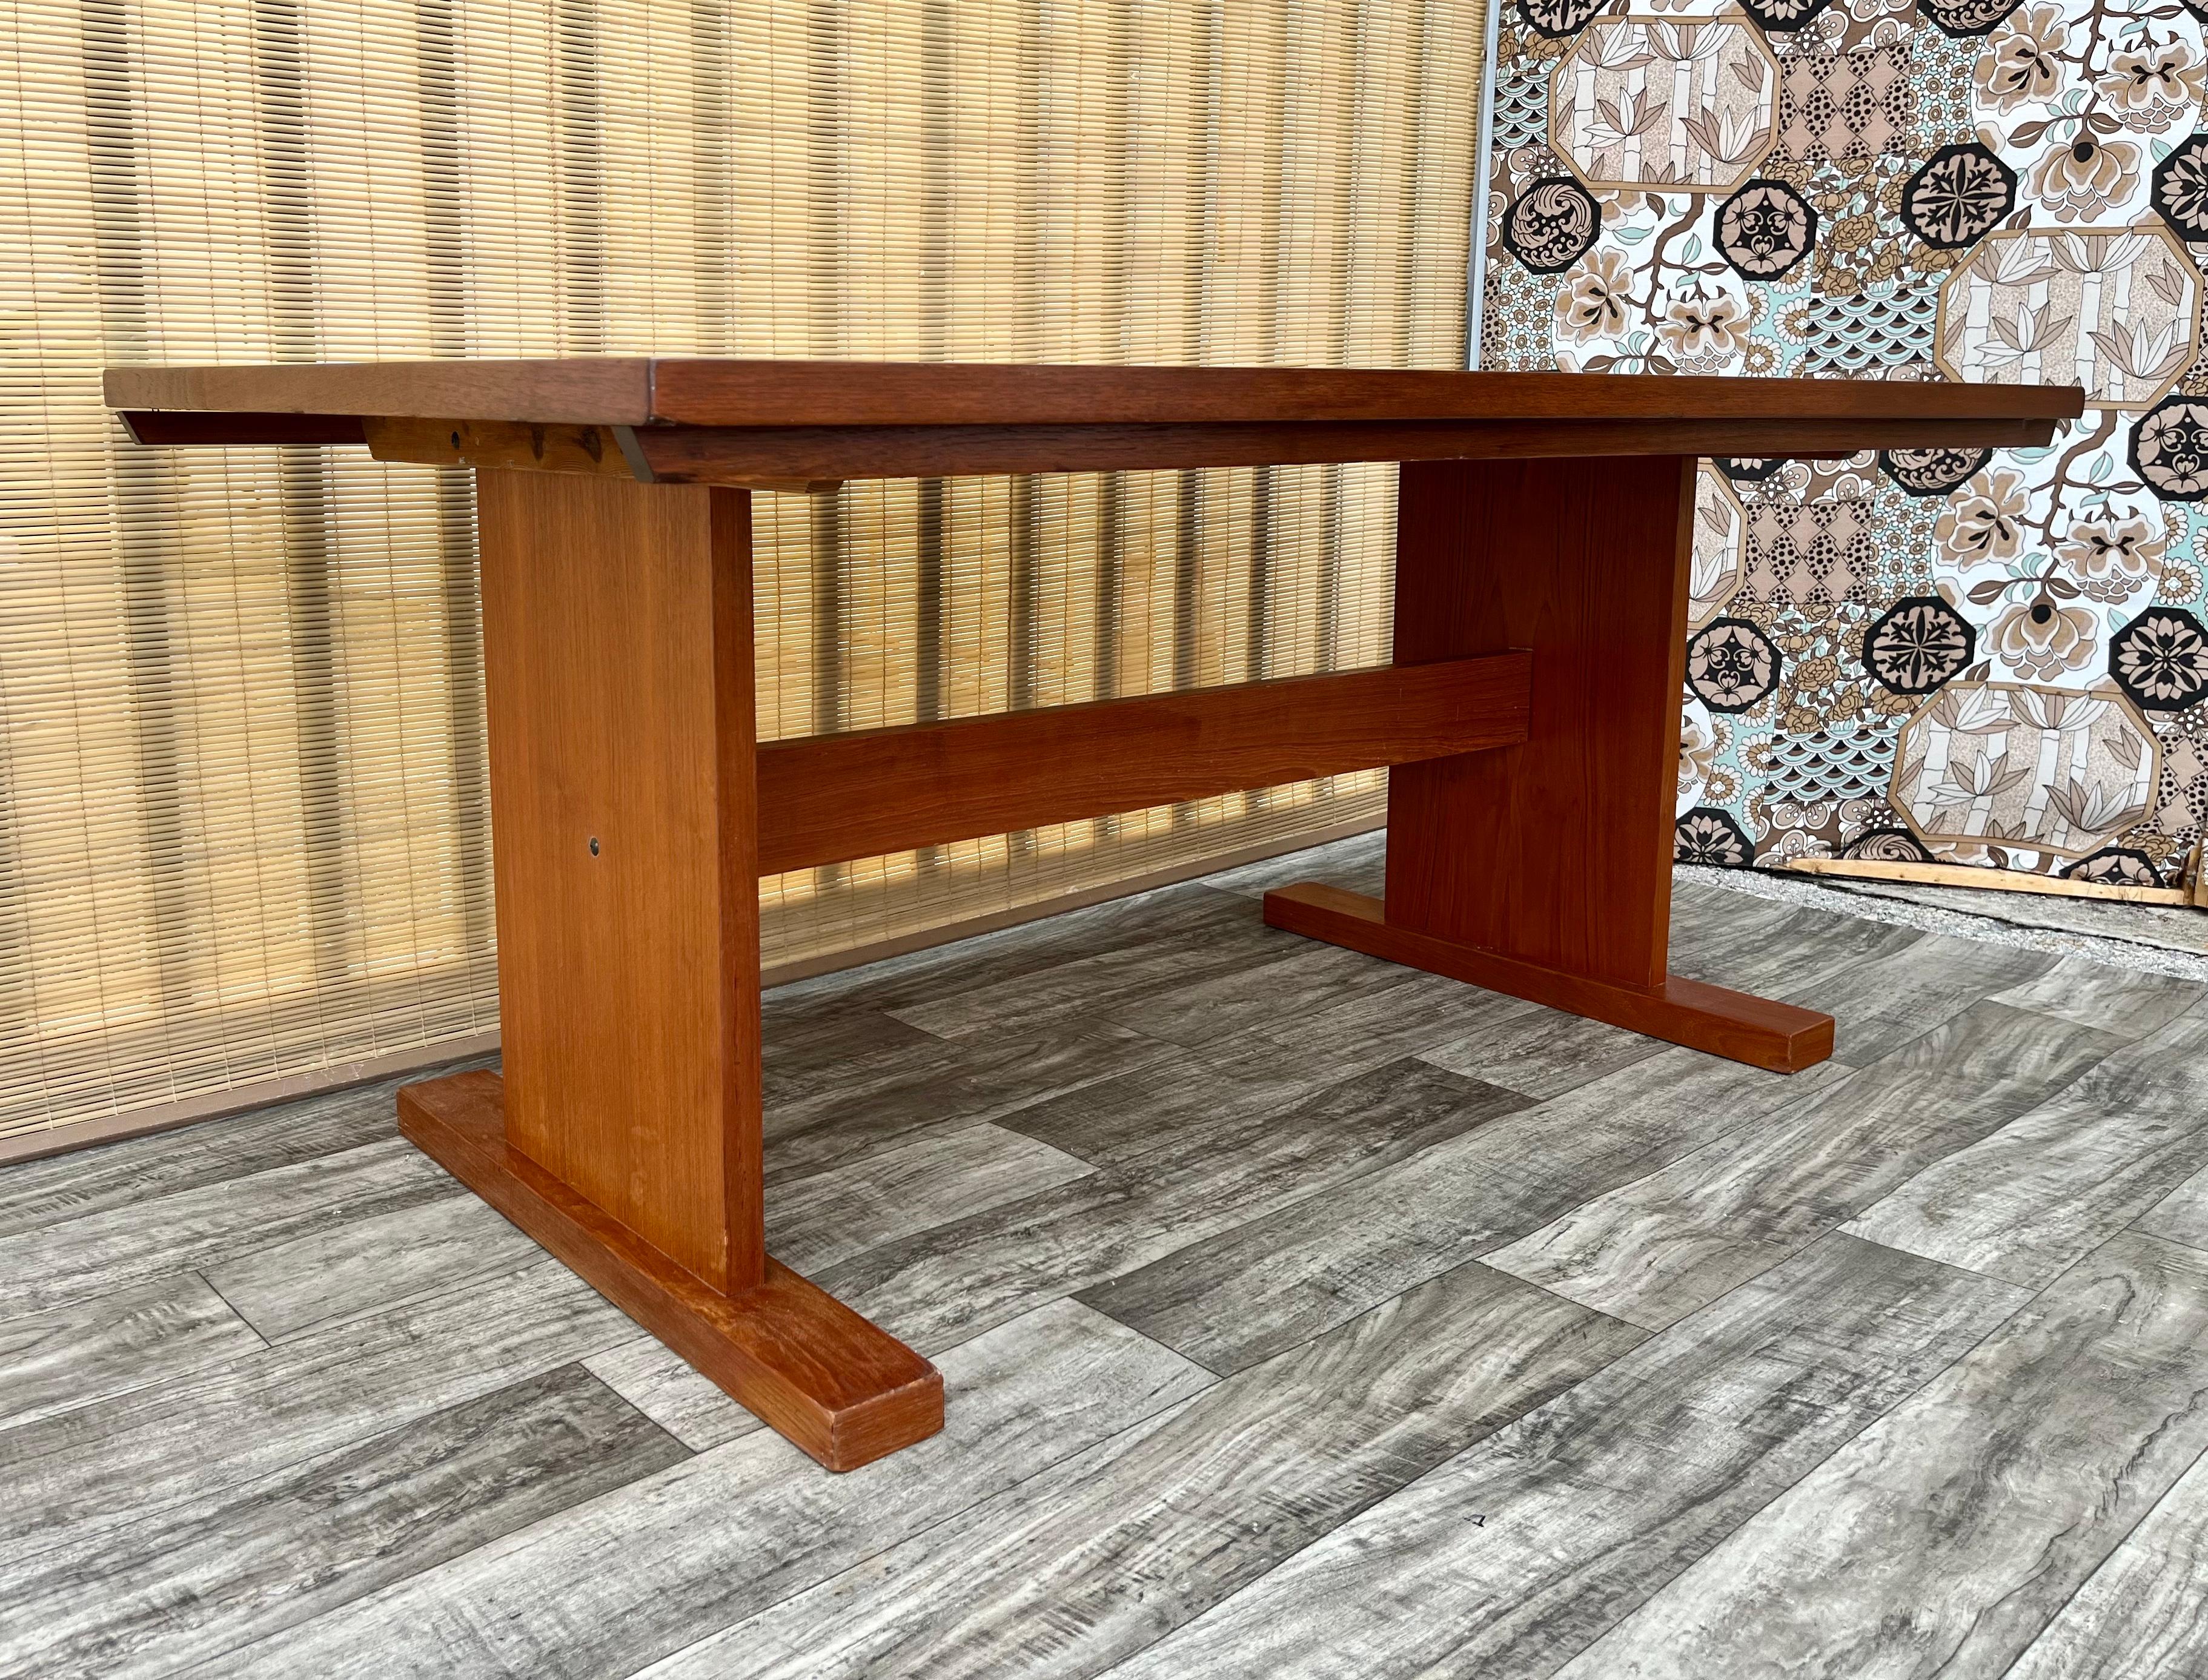 Late 20th Century Mid Century Modern Danish Dining Table With Ceramic Tile Inlay. Circa 1970s For Sale